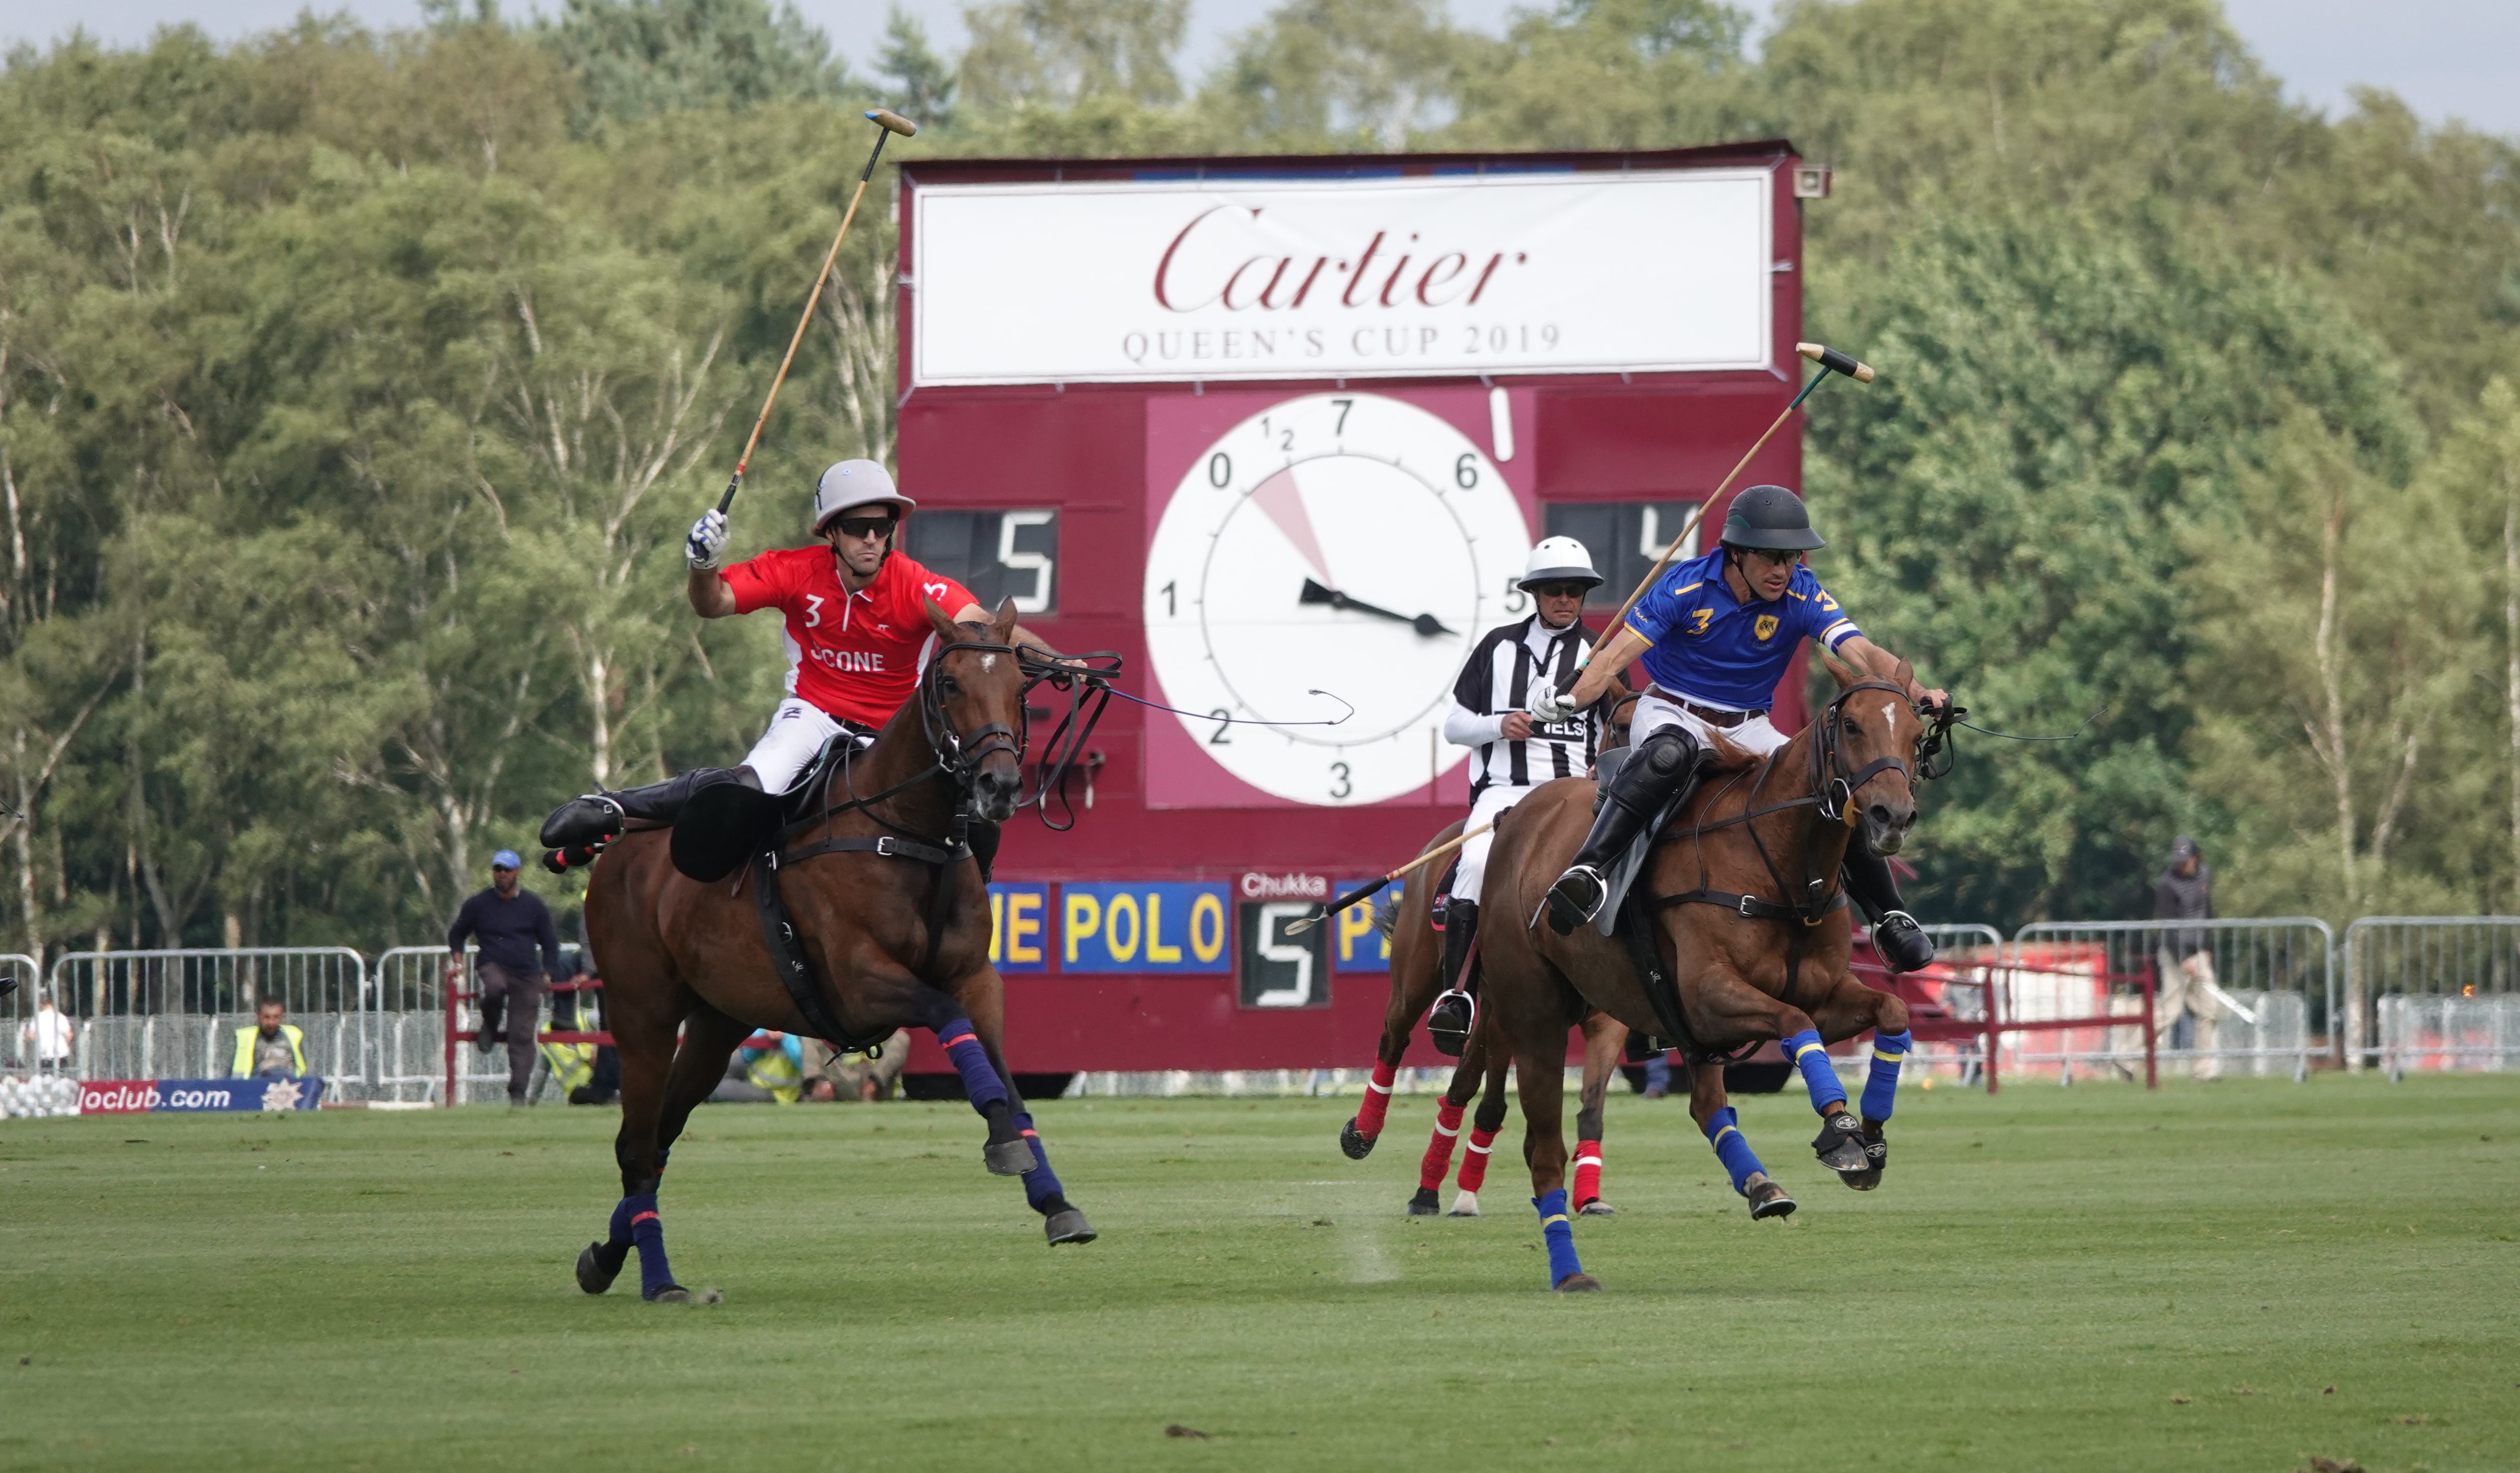 11-facts-about-queens-cup-polo-tournament